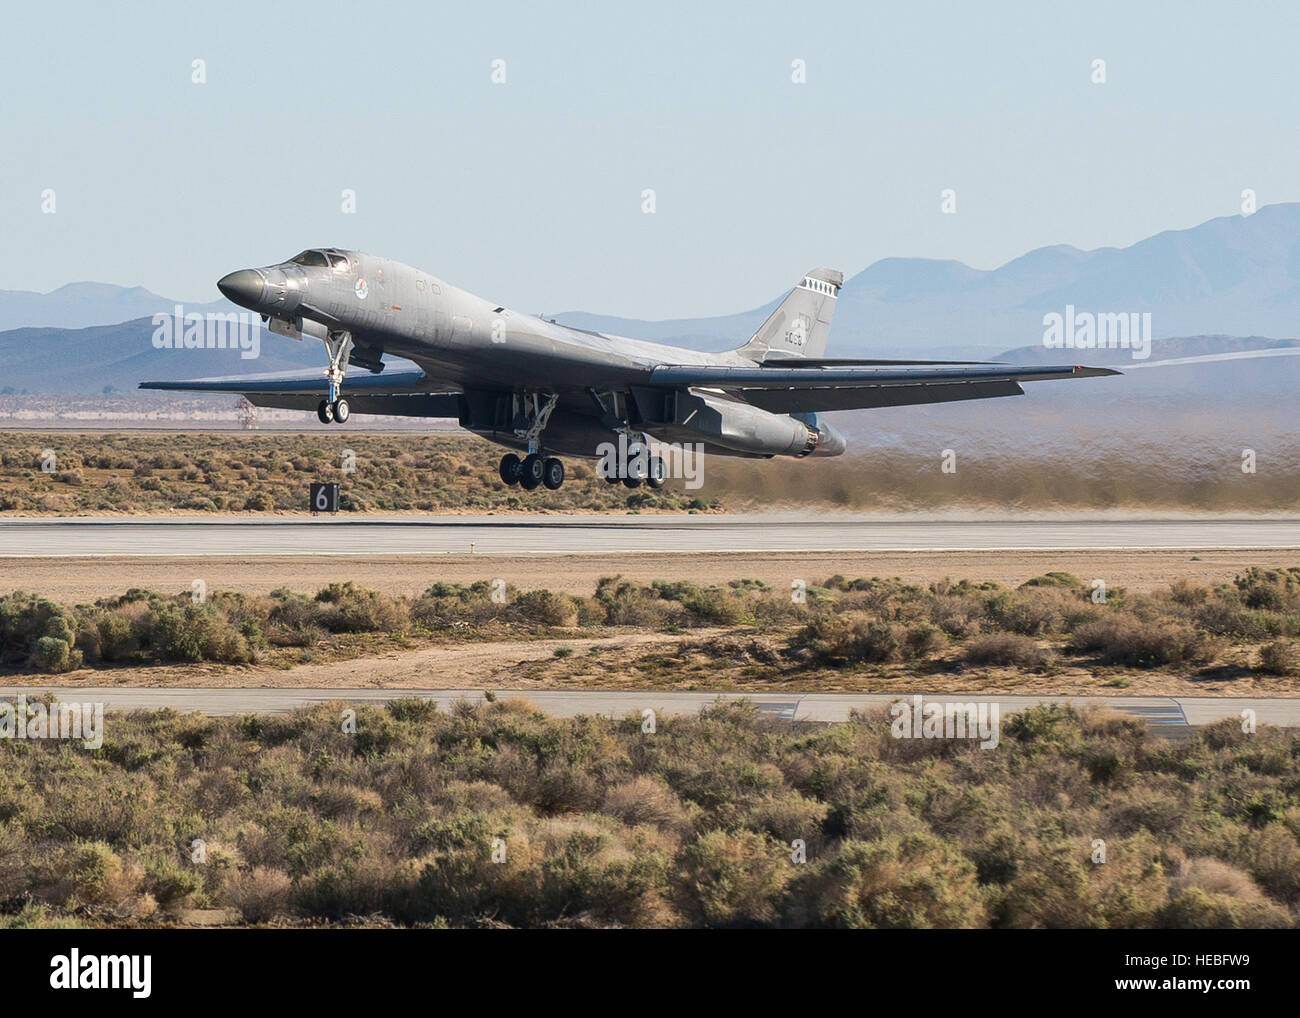 An Edwards B-1B Lancer takes off Runway 22L on April 1 to begin testing its new Sustainment Block 16A (SB 16A) software upgrades. The SB 16A software will work in conjunction with the long-range bomber’s new glass cockpit configuration in order to ensure its capabilities in a fast-paced integrated battlefield of the future. (U.S. Air Force photo by Ethan Wagner) Stock Photo